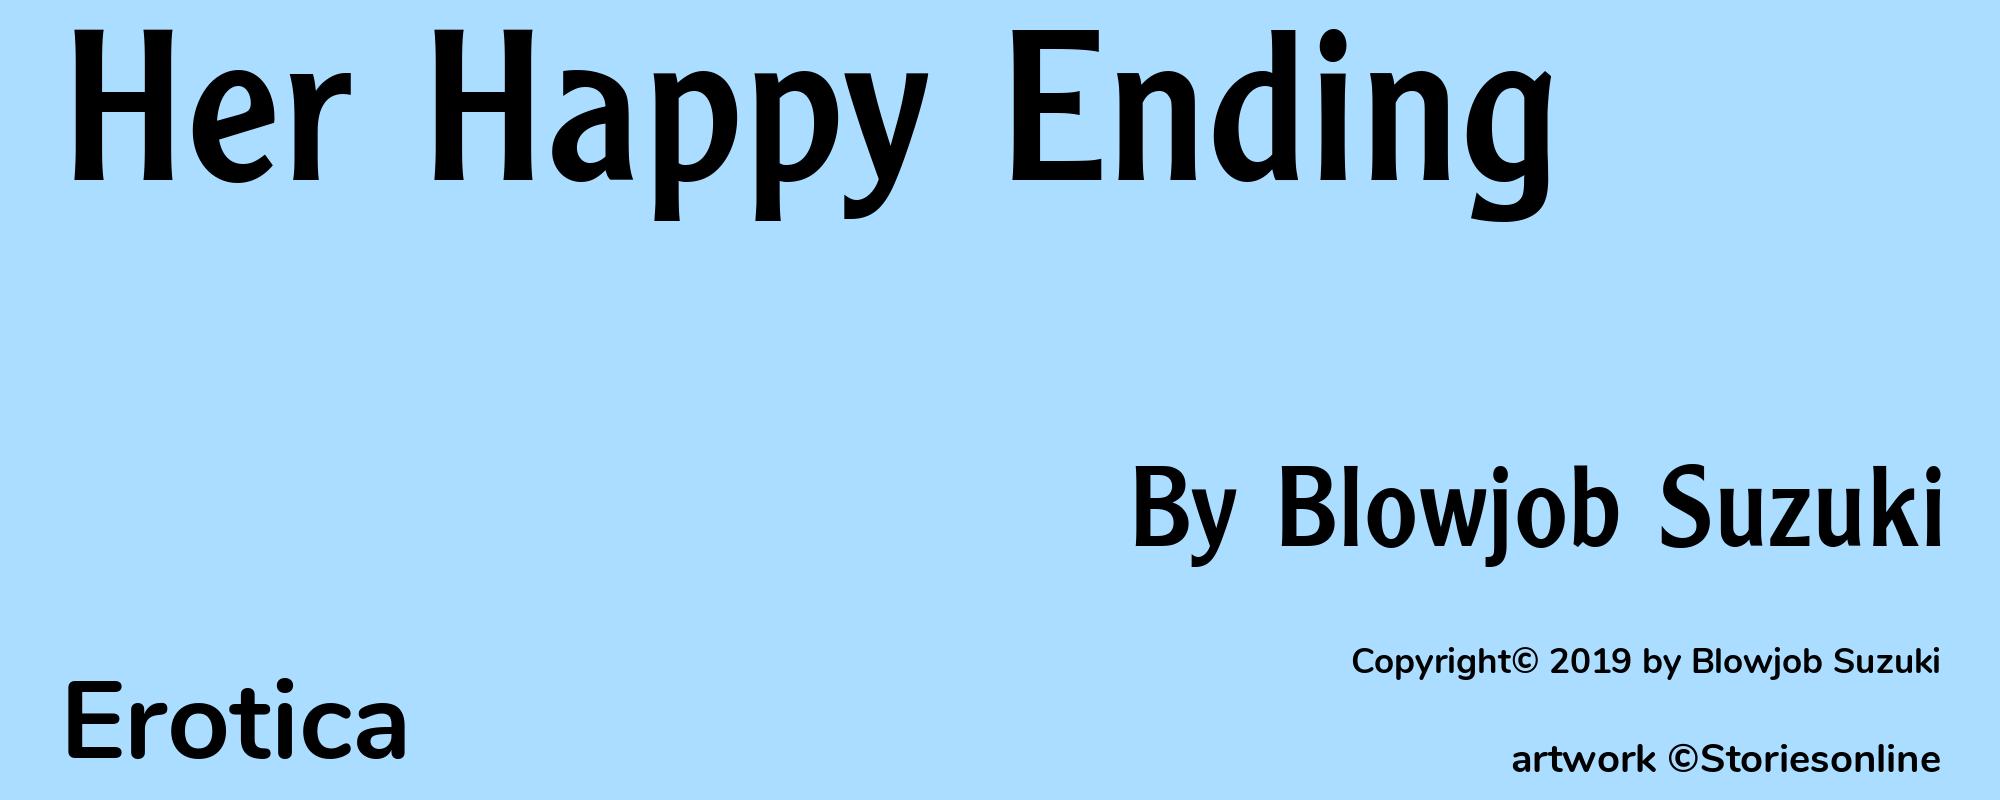 Her Happy Ending - Cover